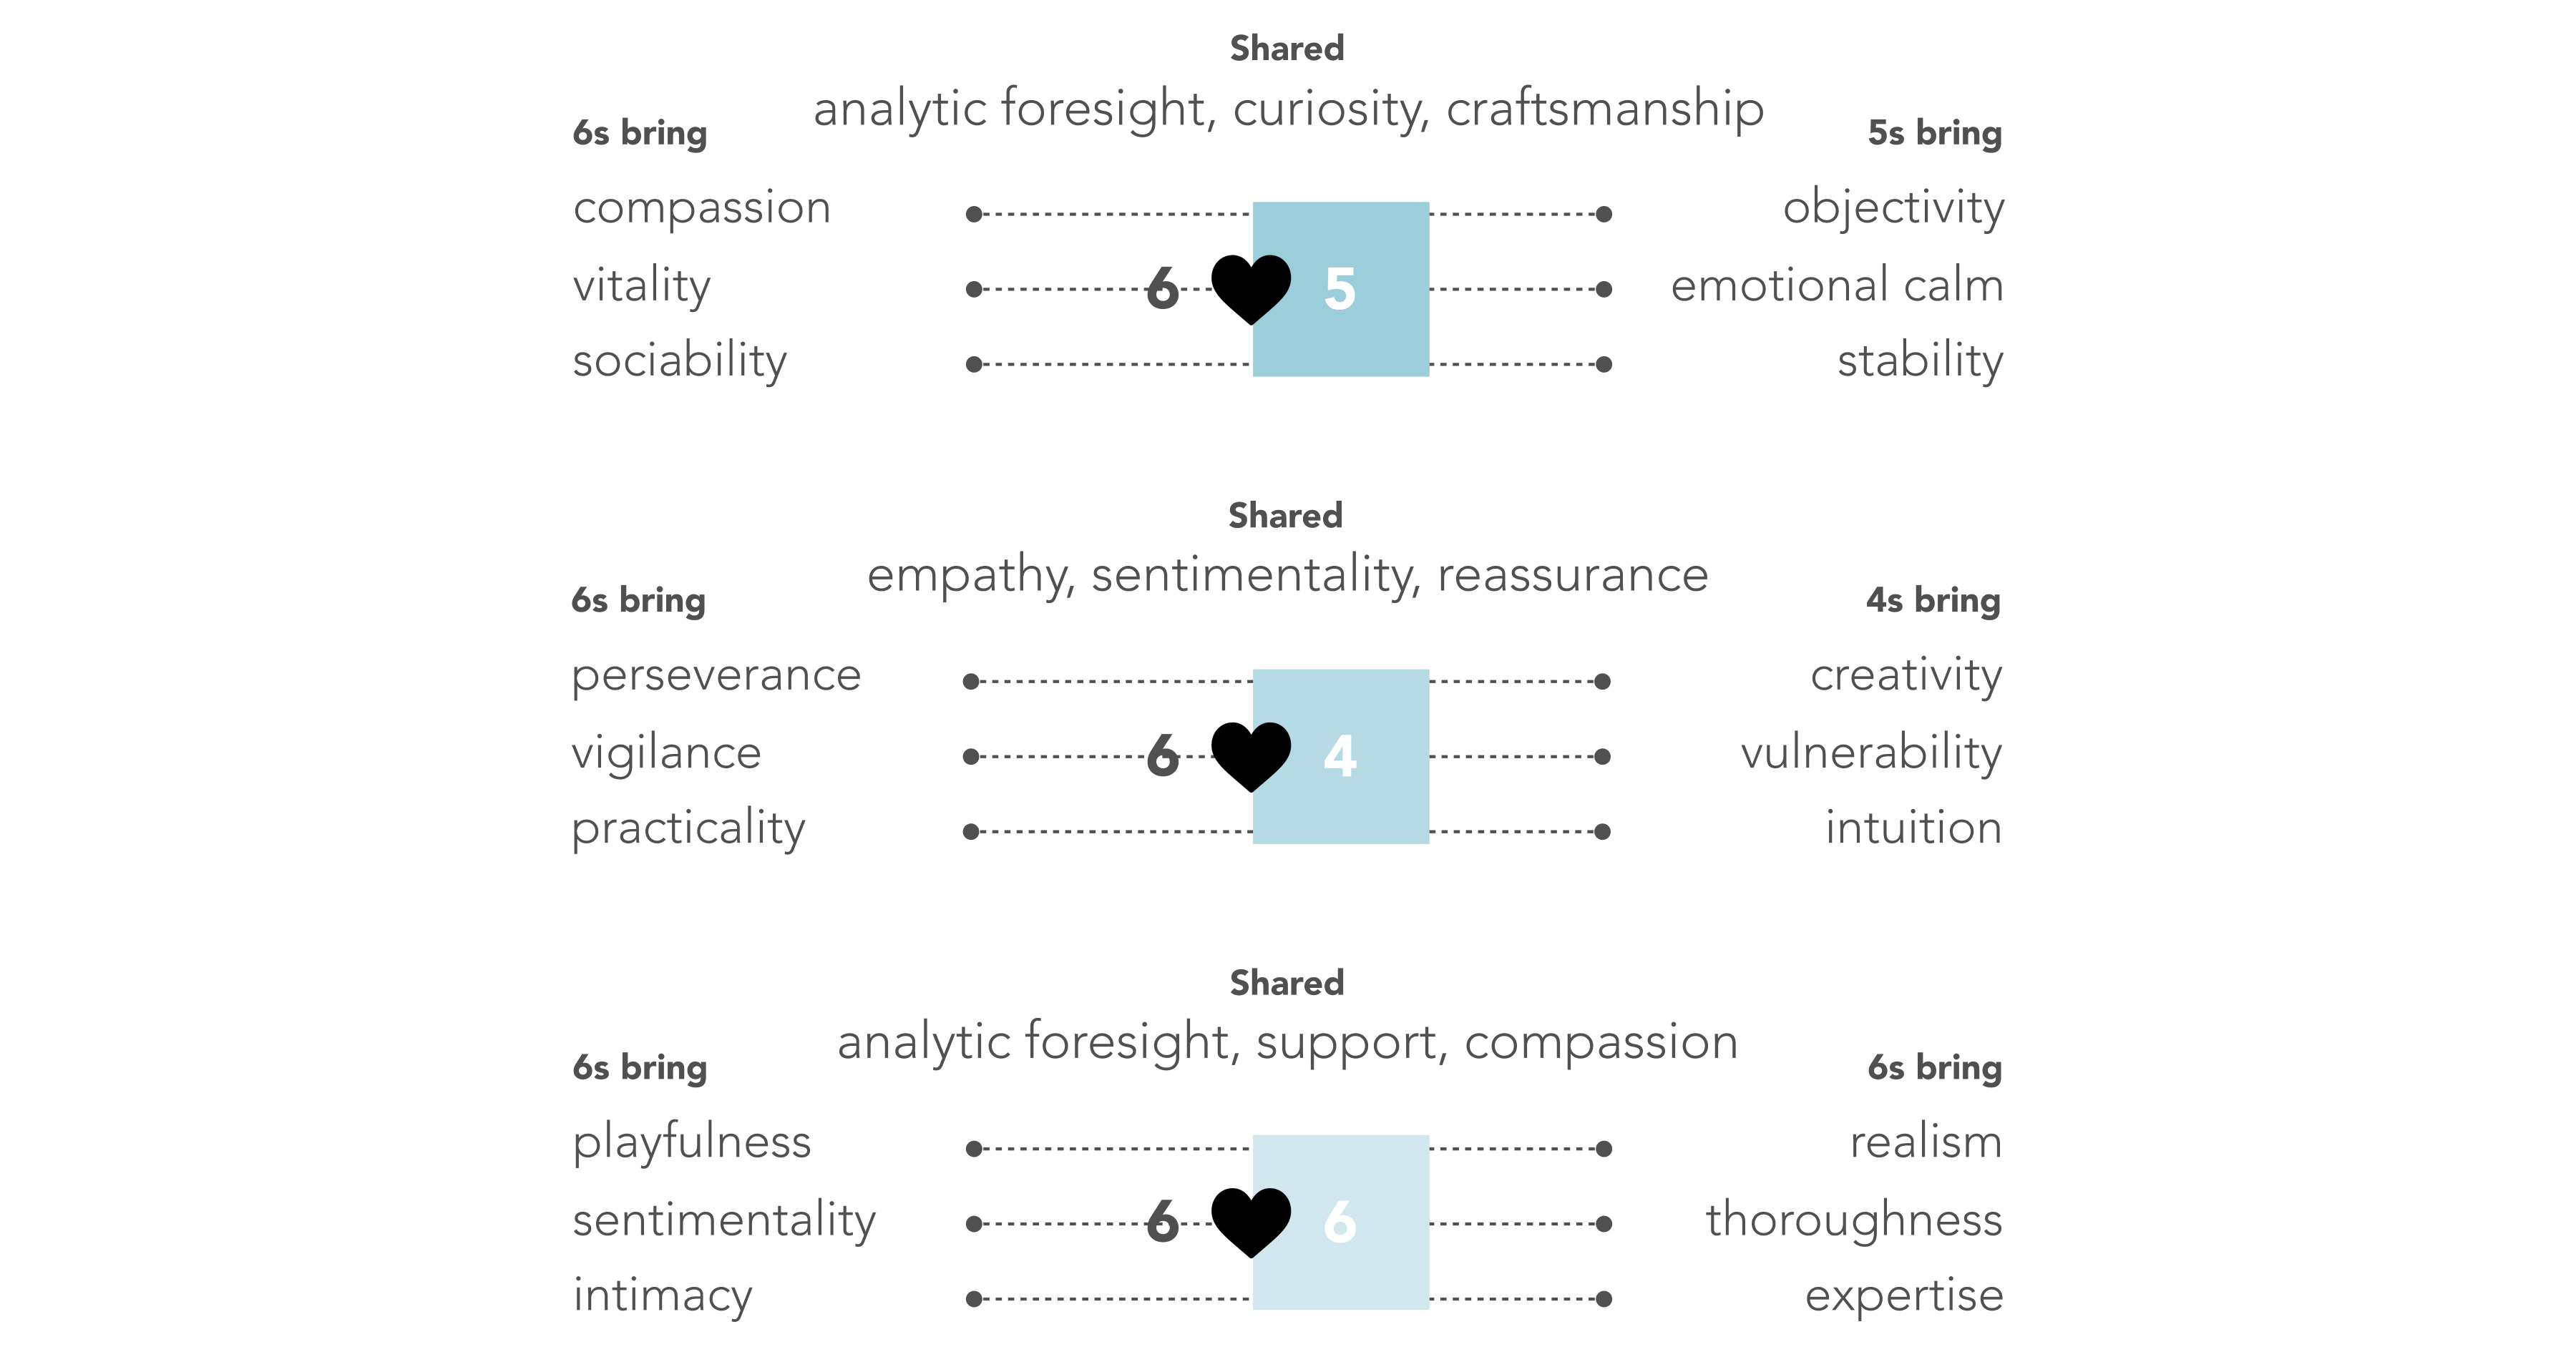 6s and 5s share analytic foresight, curiosity, craftsmanship. 6s bring compassion, vitality, sociality, while 5s bring objectivity, emotional calm, stability. 6s and 4s share empathy, sentimentality, reassurance. 6s bring perseverance, vigilance, practicality, while 4s bring creativity, vulnerability, intuition. 6s and 6s share analytic foresight, support, compassion. 6s bring playfulness, sentimentality, intimacy, while other 6s bring realism, thoroughness, expertise.